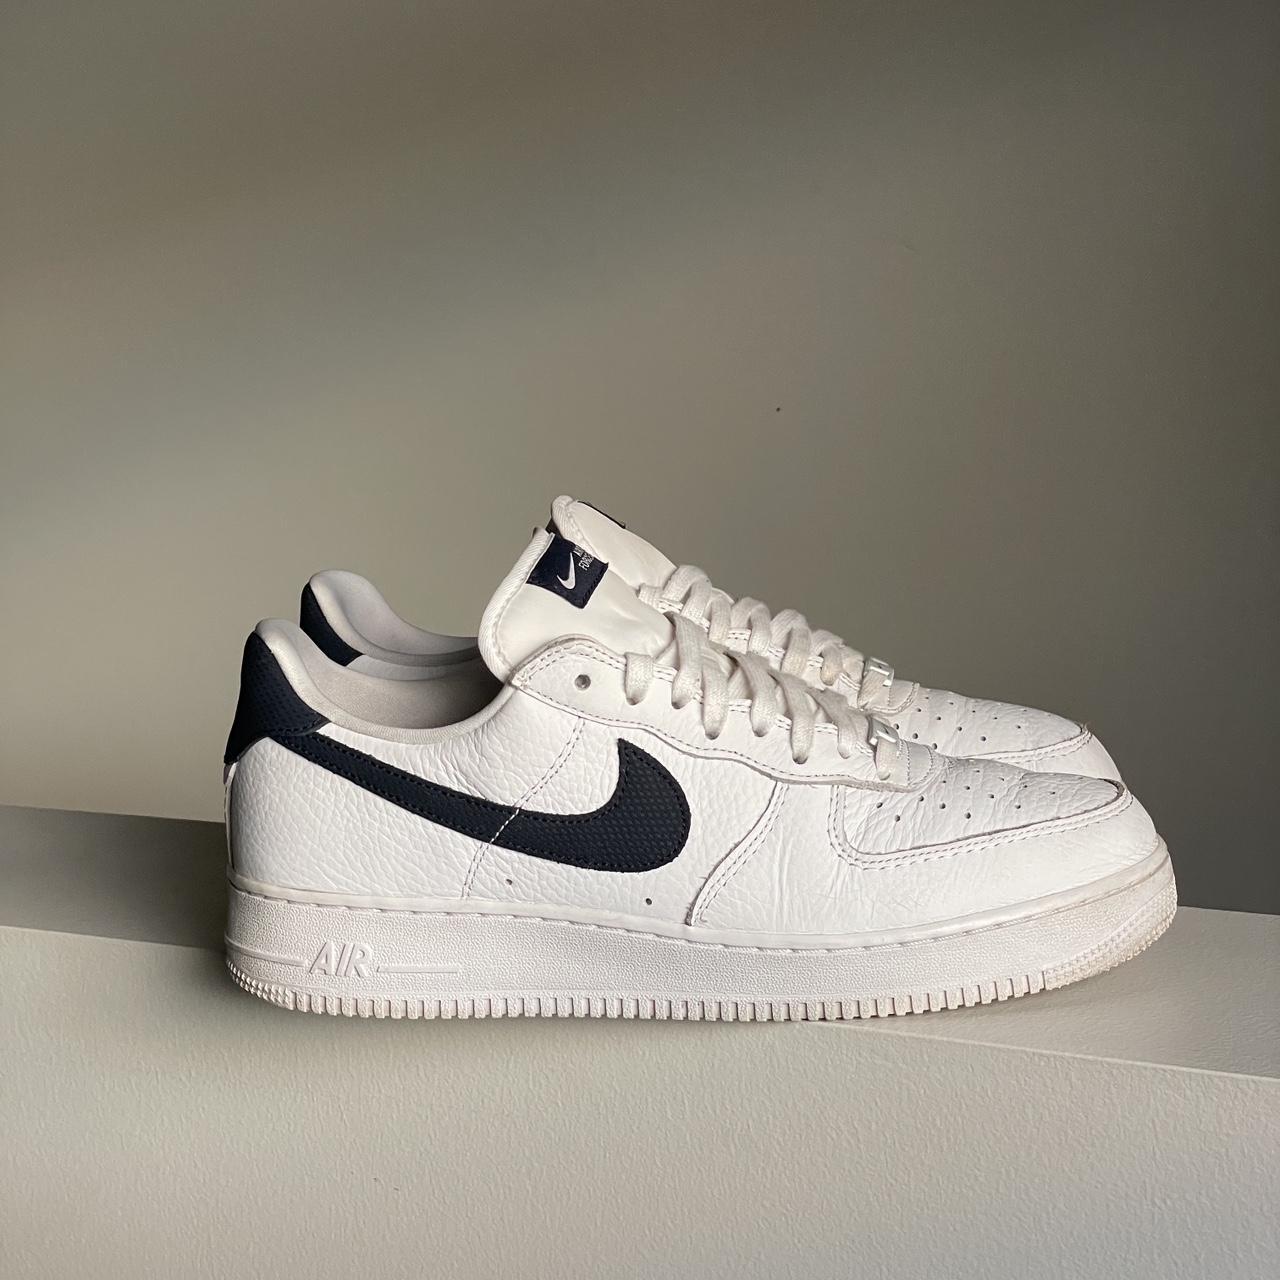 Nike Men's White and Navy Trainers | Depop